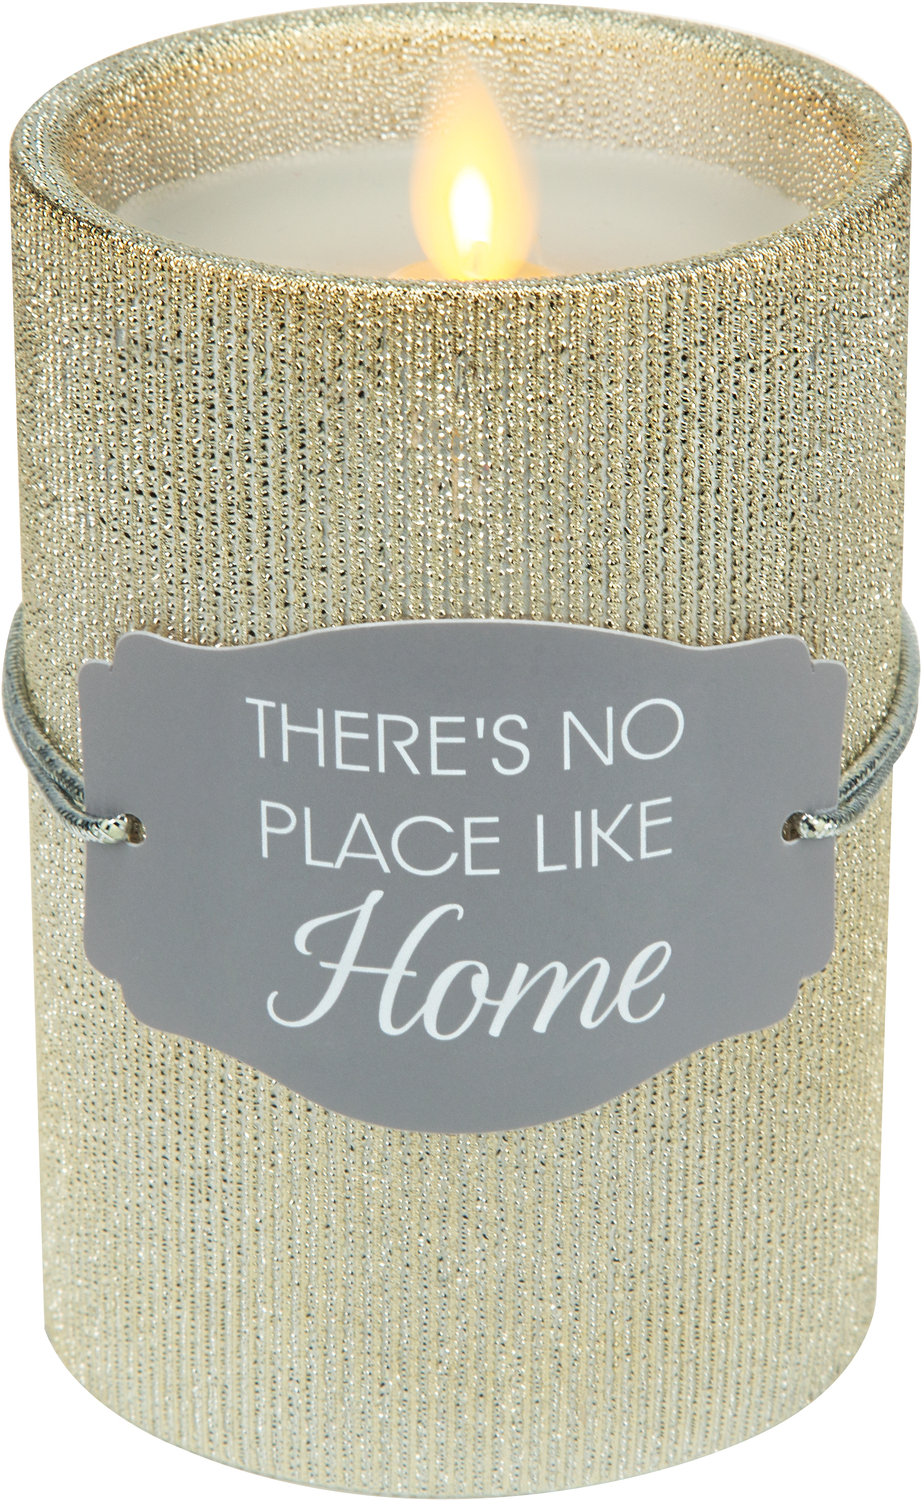 Home by Candle Decor - Home - 4.75" Gold Glitter Realistic Flame Candle 